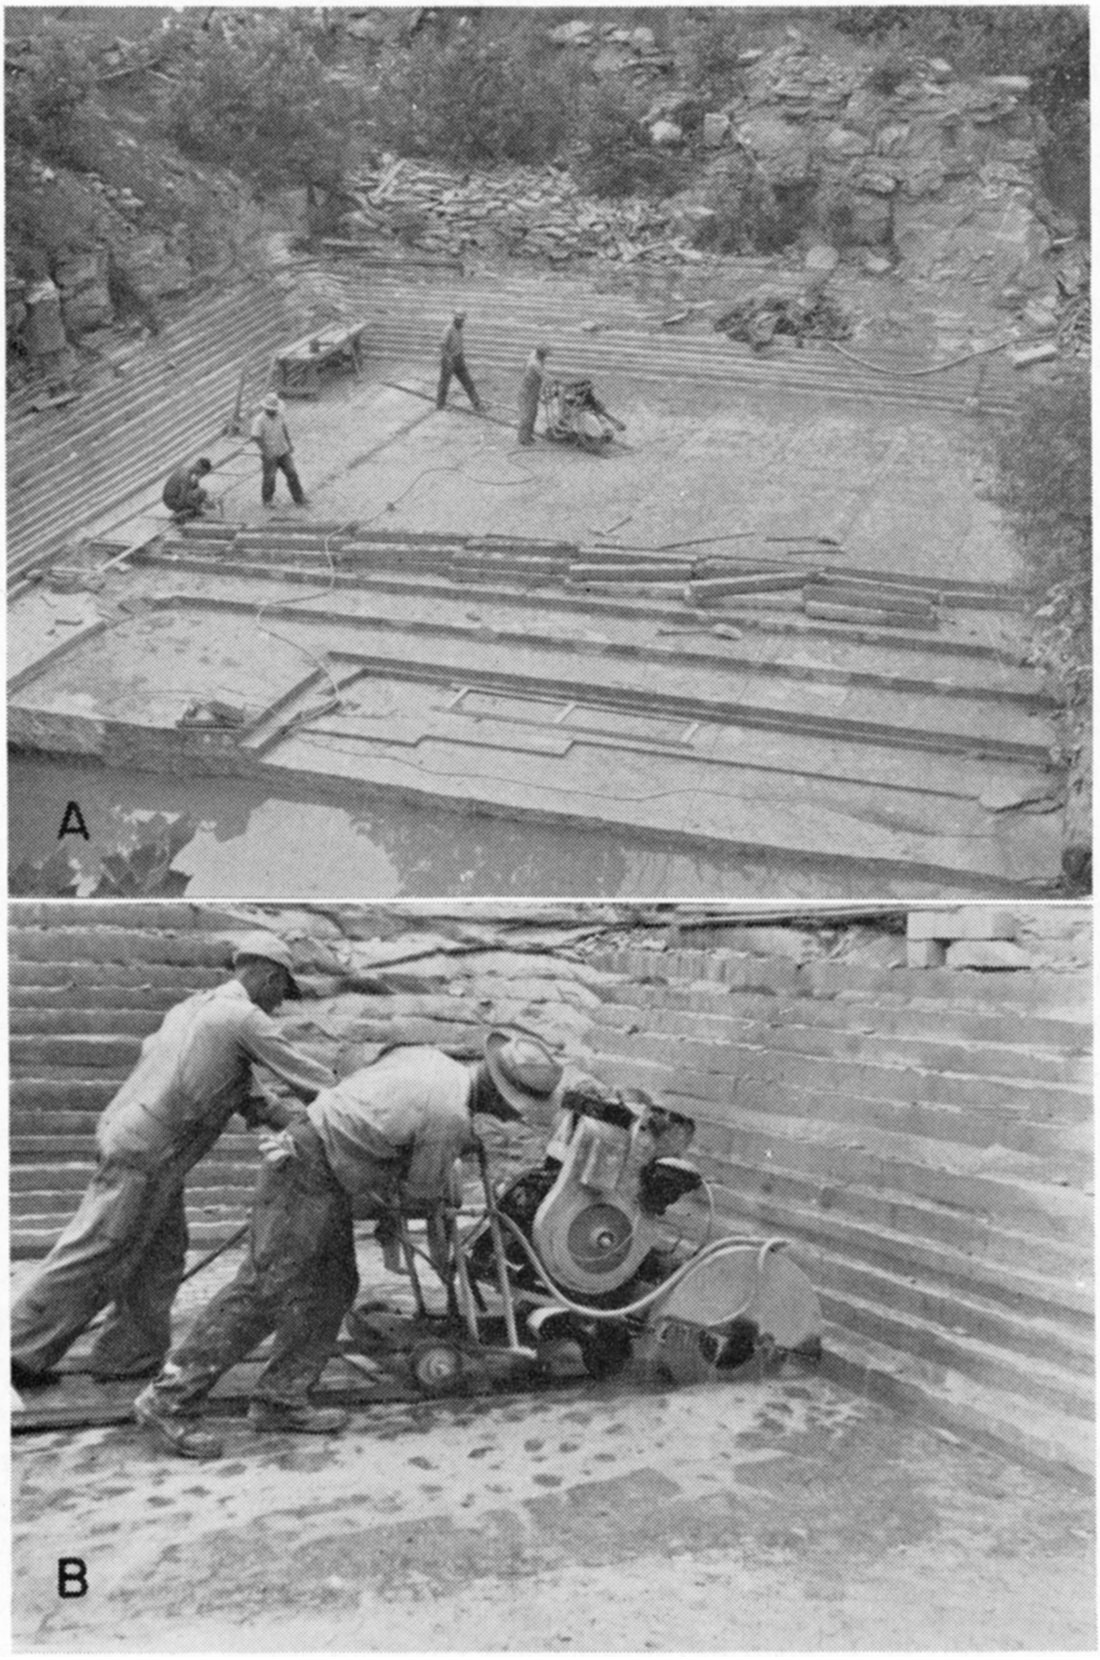 Two black and white photos; top is Bandera Quarry Sandstone, Bandera Stone Quarry operations, Bourbon County; bottom is Bandera Quarry Sandstone, diamond saw cutting rectangular flags.